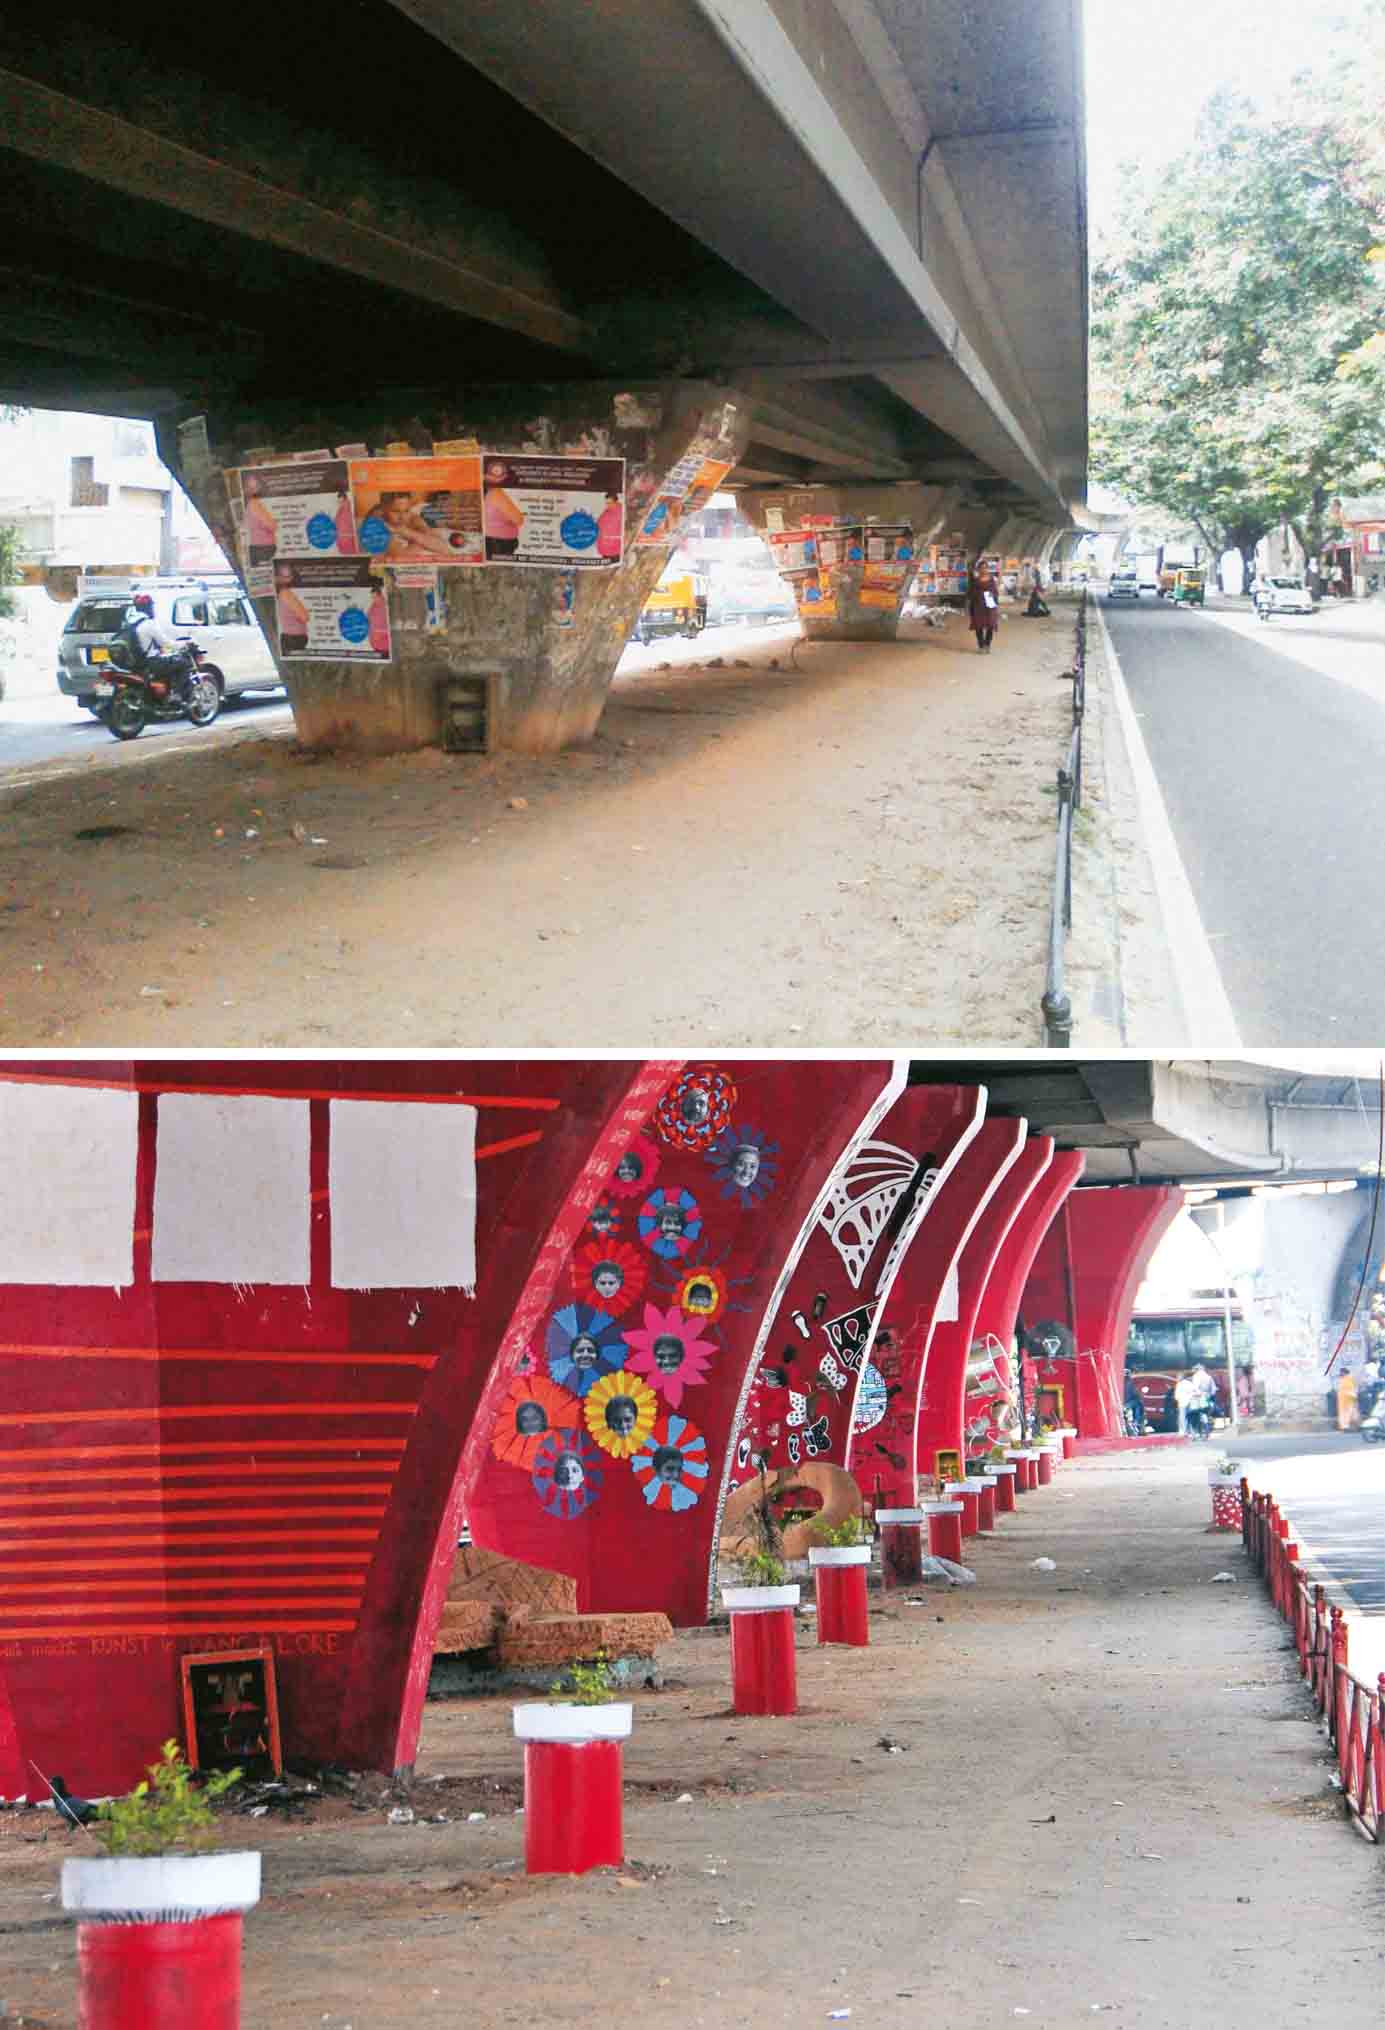 community-art-jaaga-initiative-flyover-columns-once-existed-completed-art